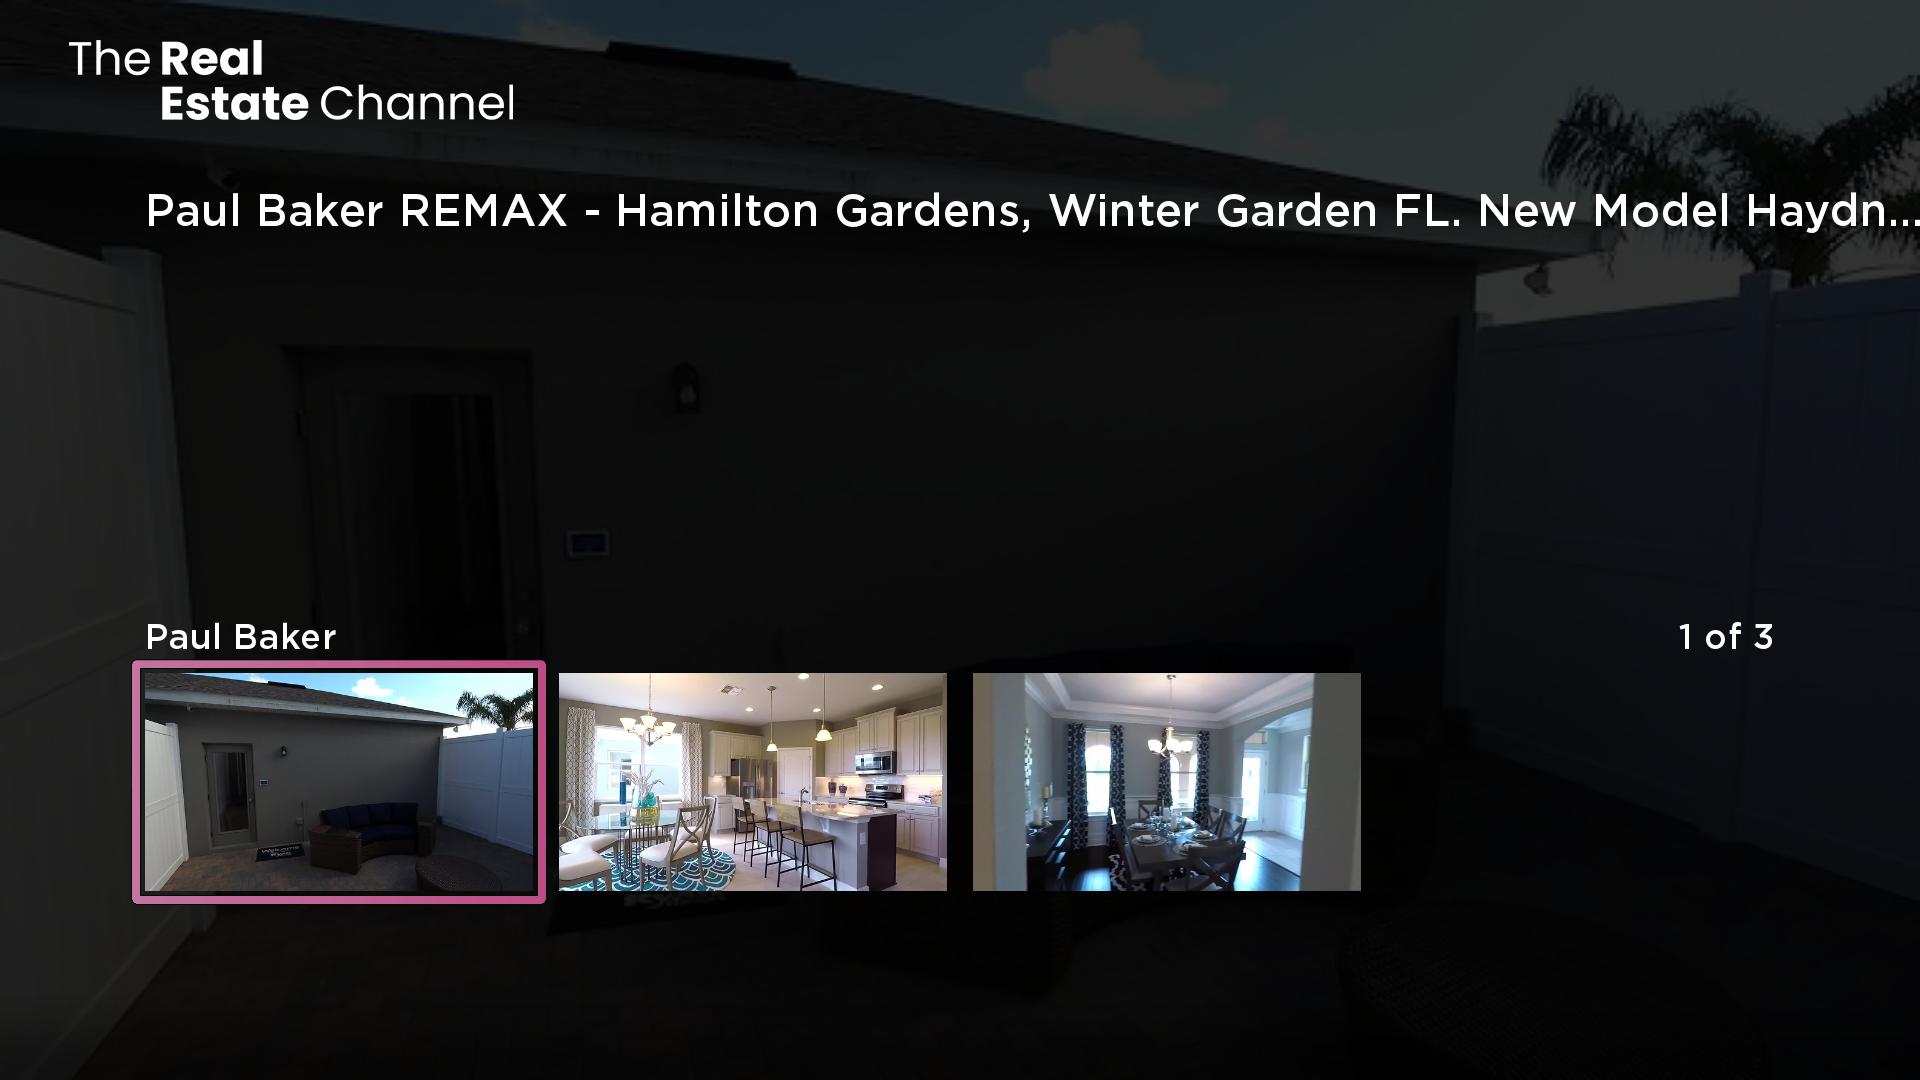 The Real Estate Channel Screenshot 003